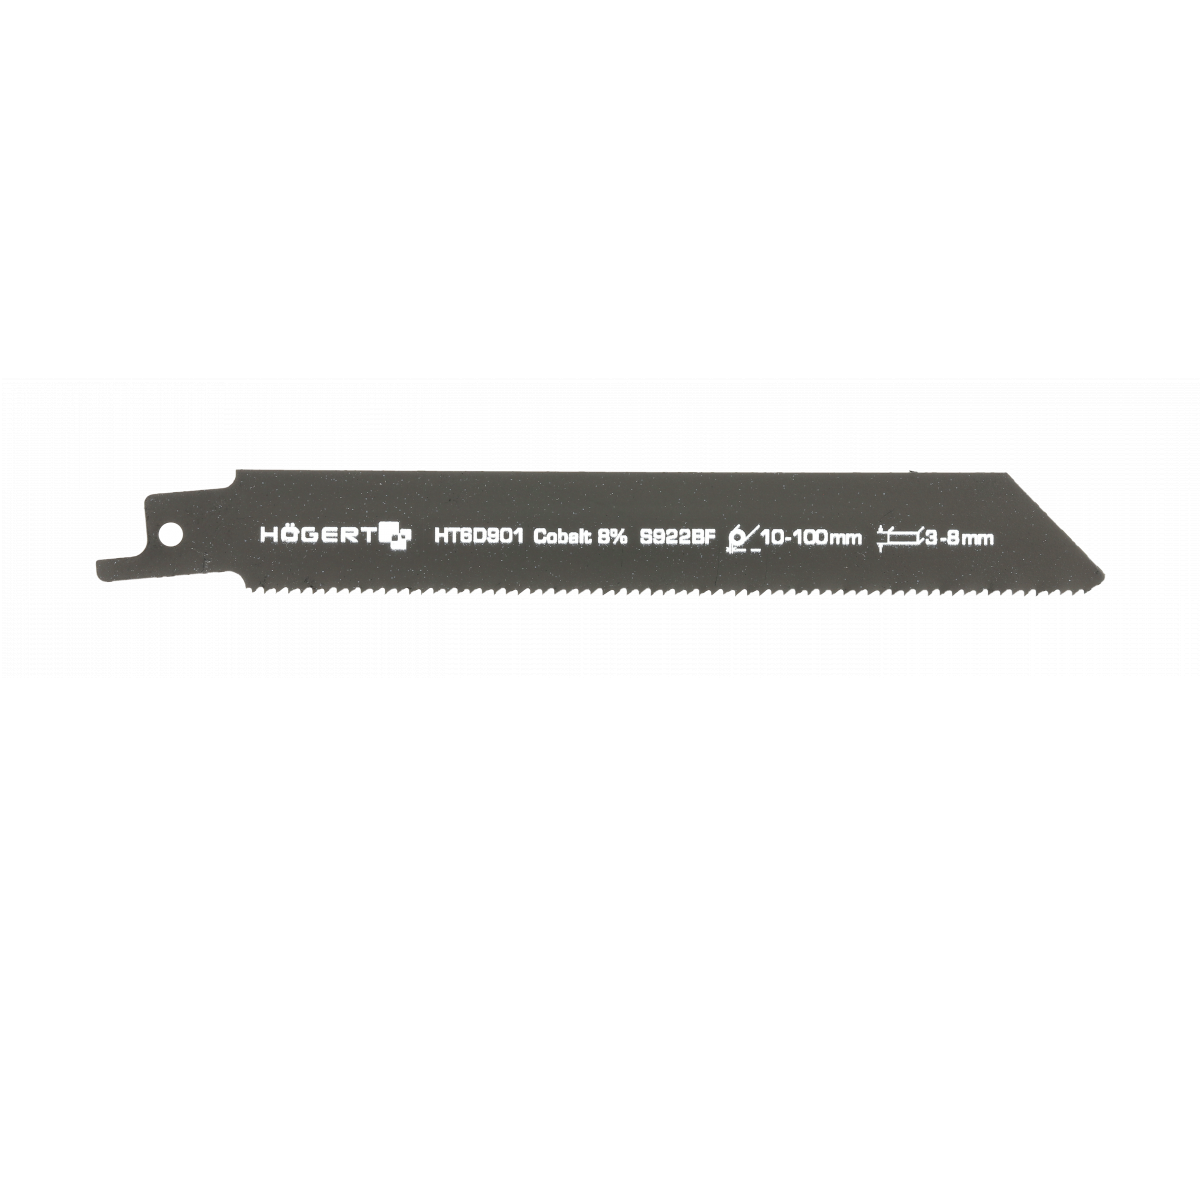 Hoegert Technik Steel Cutting Reciprocating Saw Blade 150mm 14 TPI HT6D901 (Pack of 5)